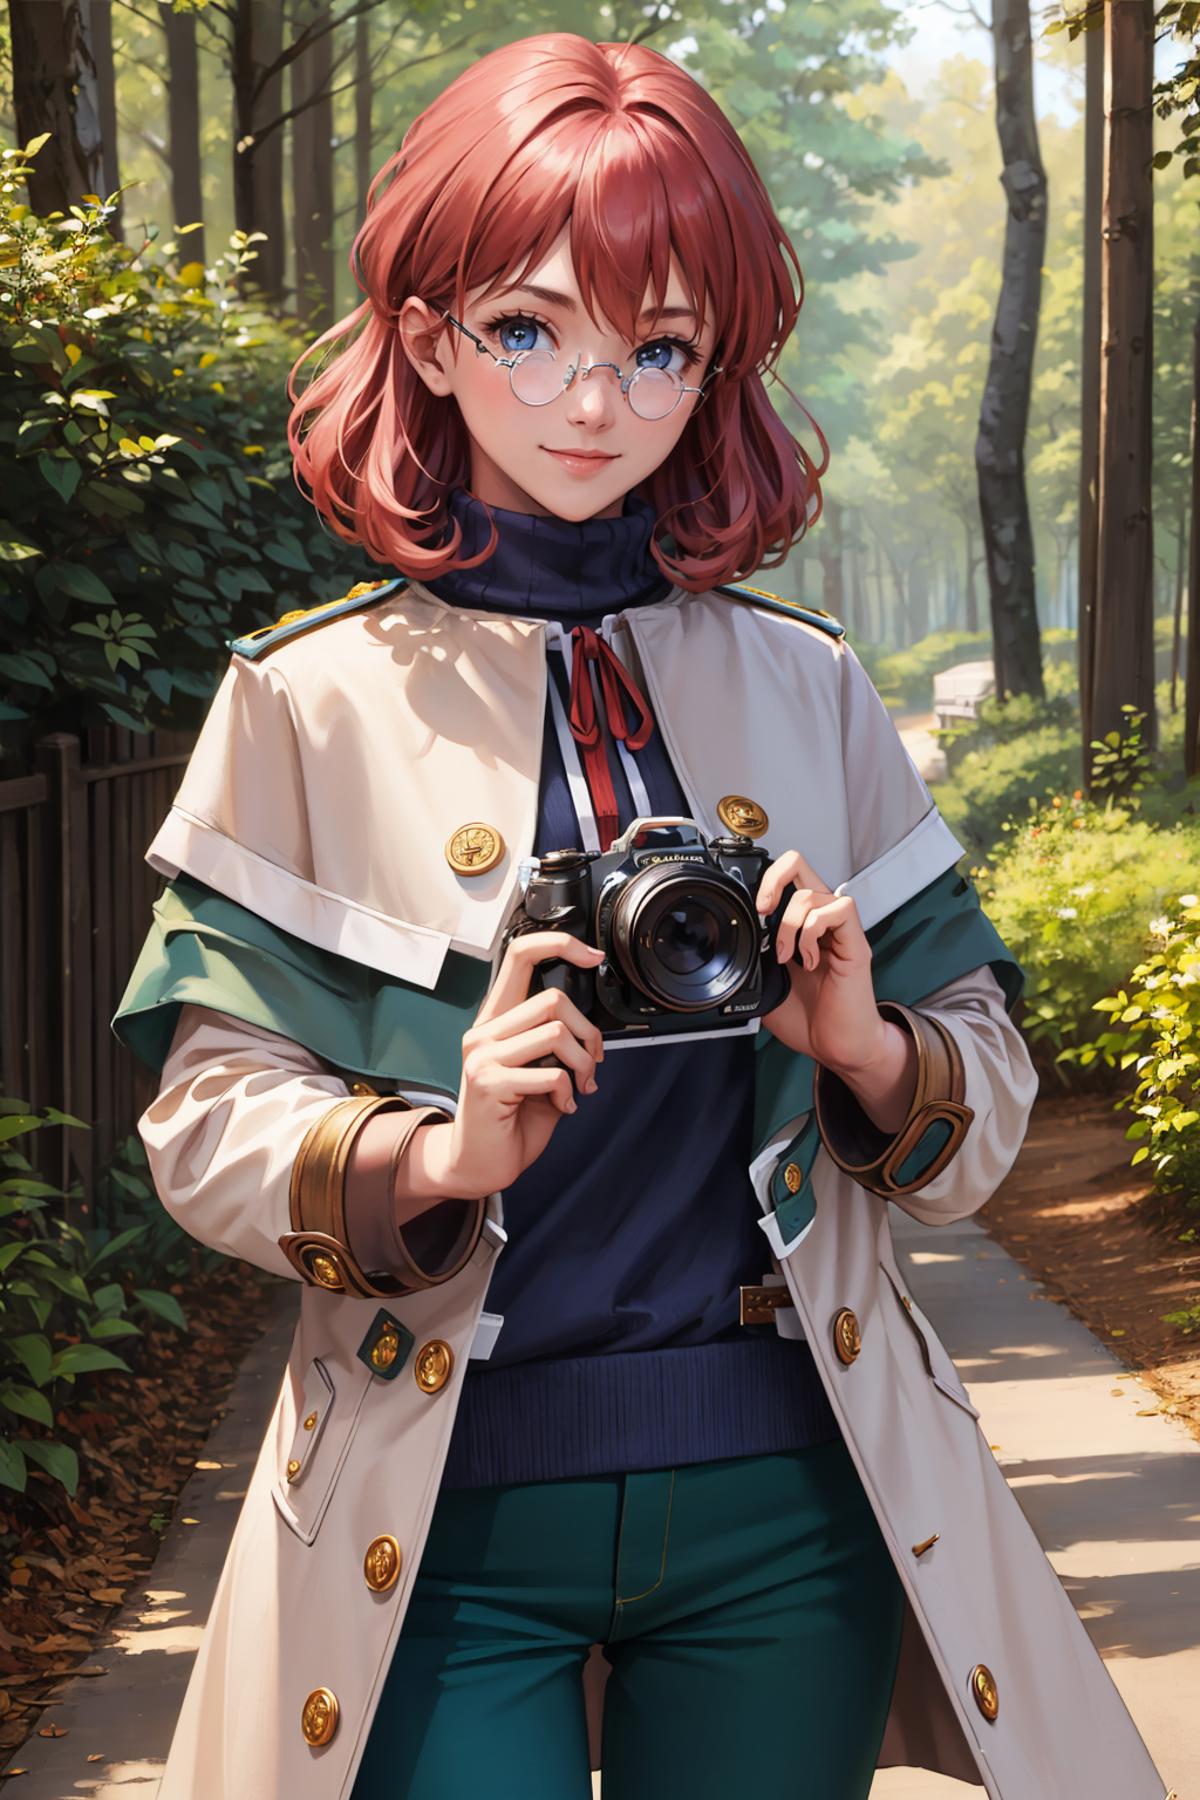 The image depicts a young woman wearing a white coat and holding a camera, standing on a sidewalk near a forest. She is posing for a picture, perhaps capturing a scenic moment or capturing her own image. The woman is wearing glasses and appears to be focused on her camera.